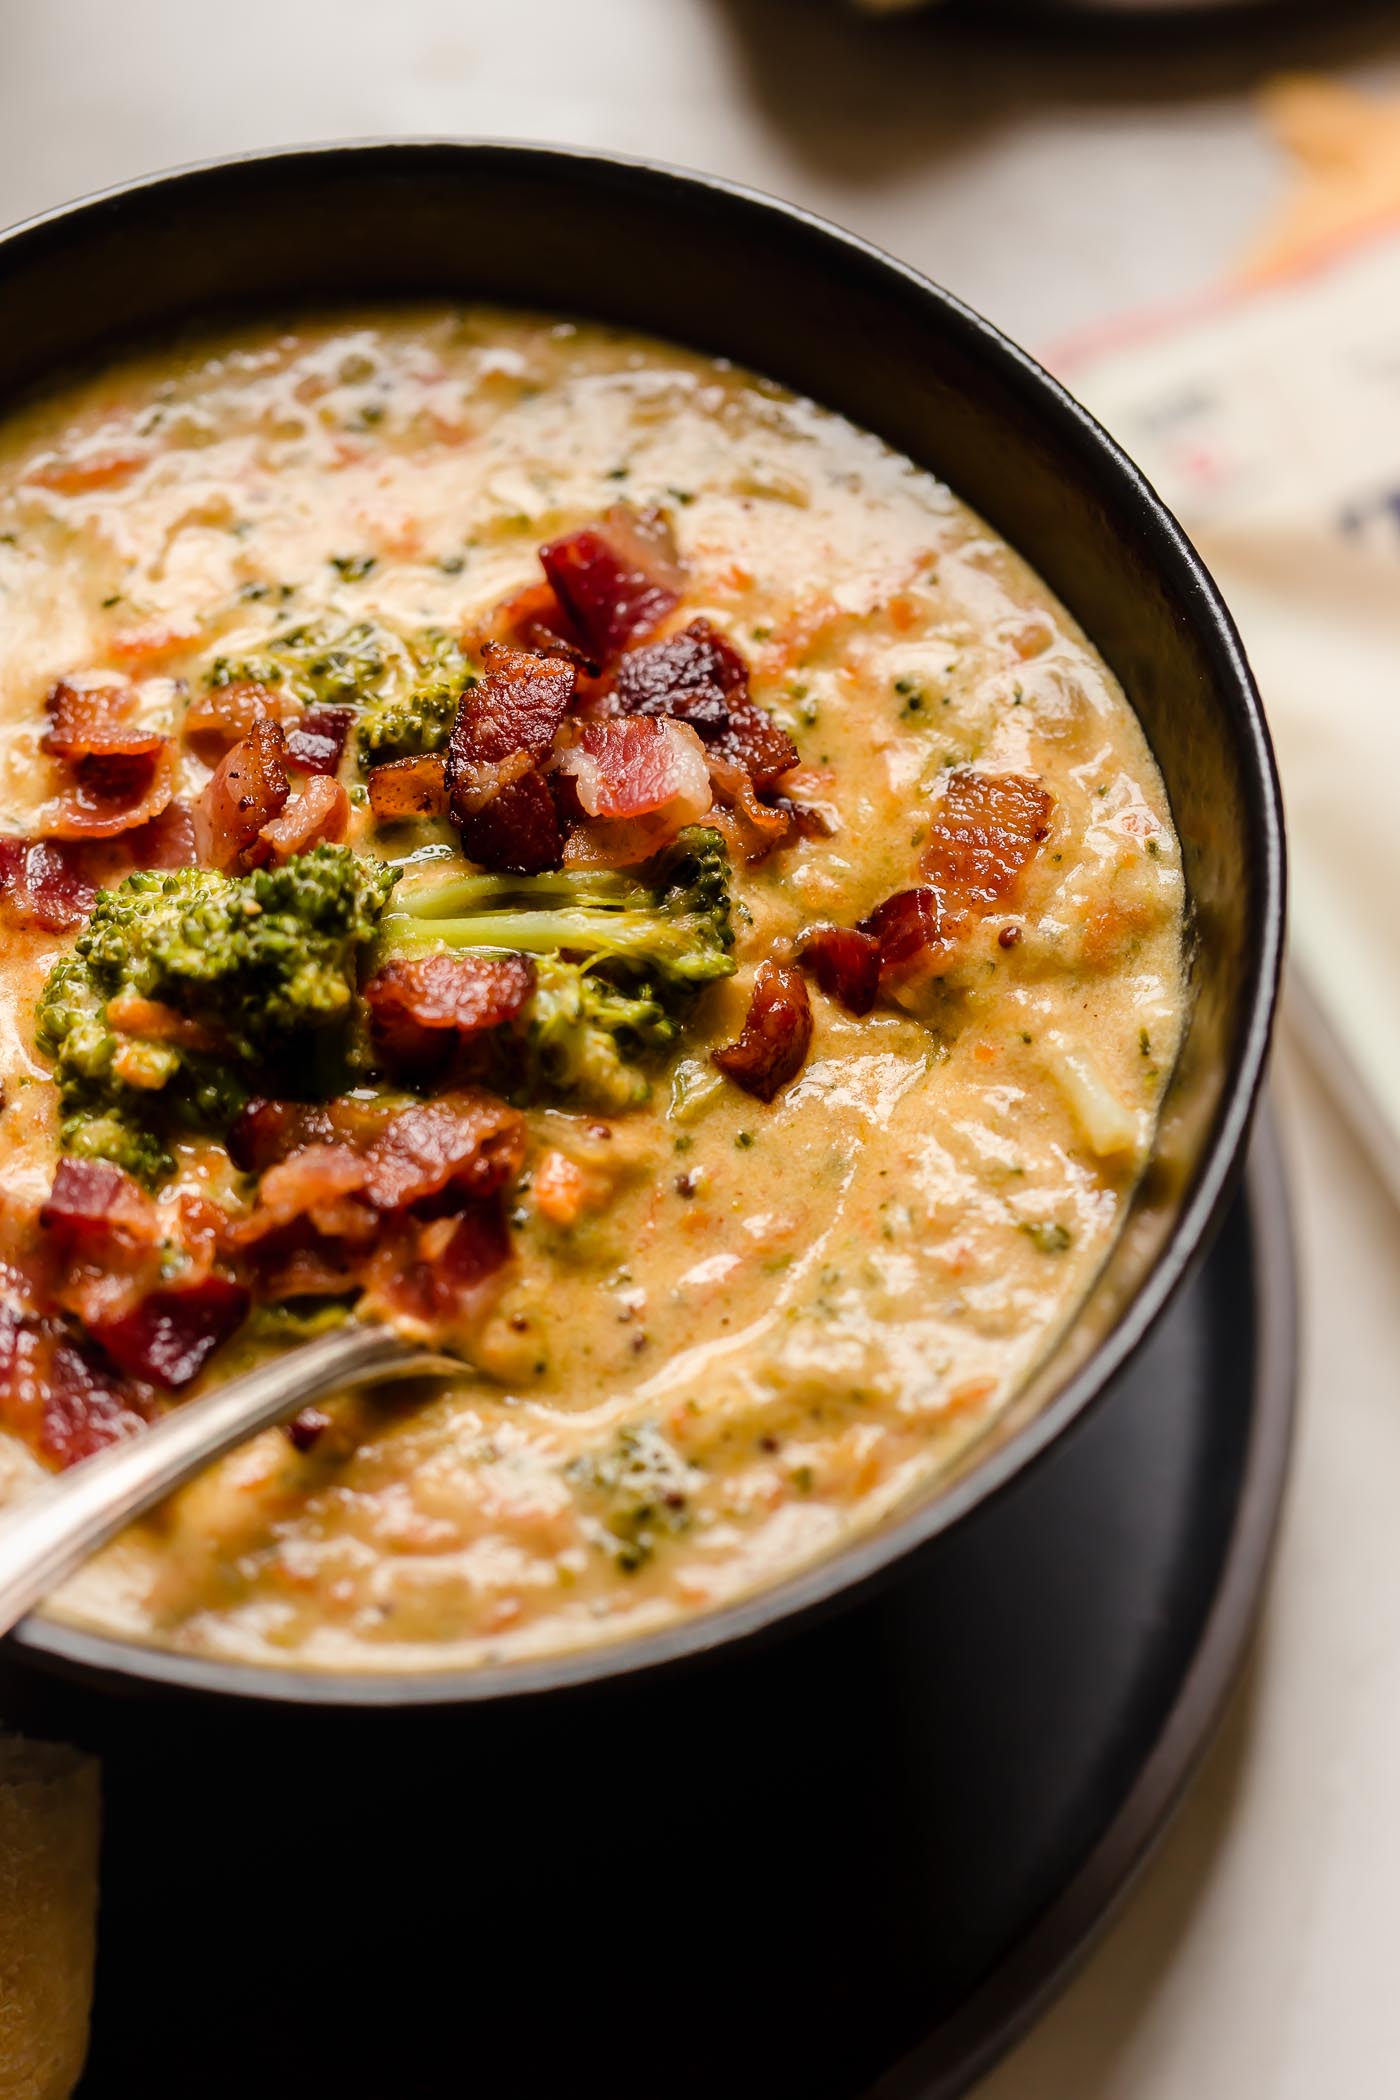 bacon beer cheese broccoli cheddar soup. a cross between two classic comforting soups, beer cheese soup & broccoli cheese soup, this bacon beer cheese broccoli cheddar soup is thick, luscious, creamy, & decadent made with @Tillamook Farmstyle Cut Sharp Cheddar Shredded Cheese. the ultimate comfort food dinner to warm you up on a cold night this winter! #playswellwithbutter #broccolicheddarsoup #broccolicheesesoup #bestbroccolicheesesoup #creamybroccolicheesesoup #beercheesesoup #bestbeercheesesoup #baconbeercheesesoup #comfortfood #comfortfoodrecipes #ad #Tillamook_Partner #TillamookCheese